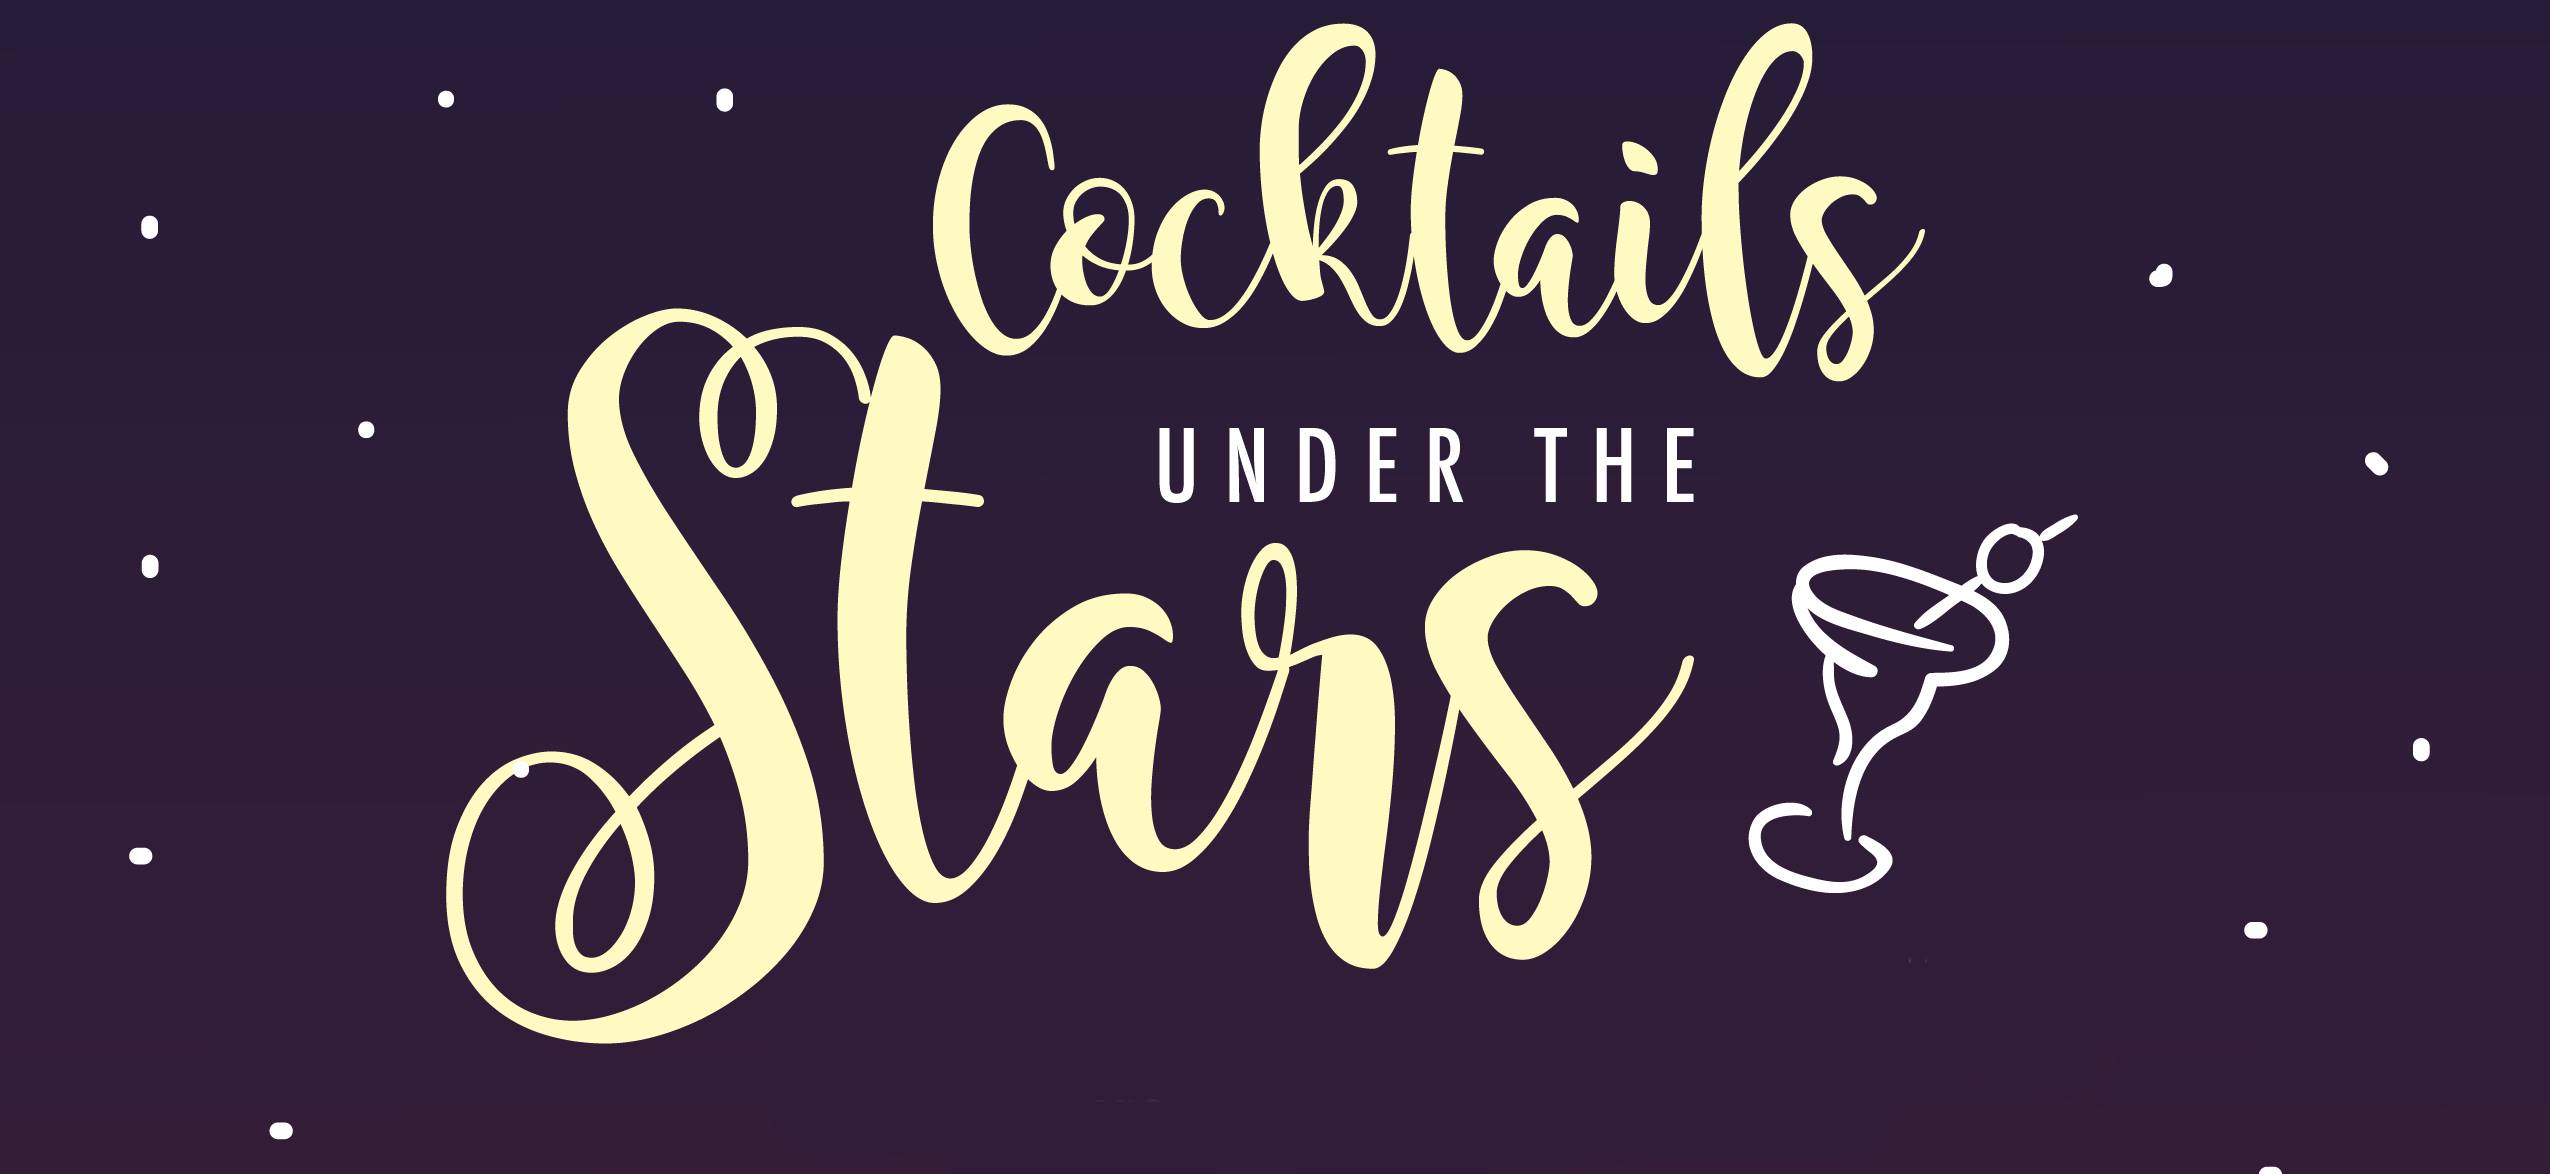 Cocktail Under the Stars Raises Money for Youth Theater on August 9th ...